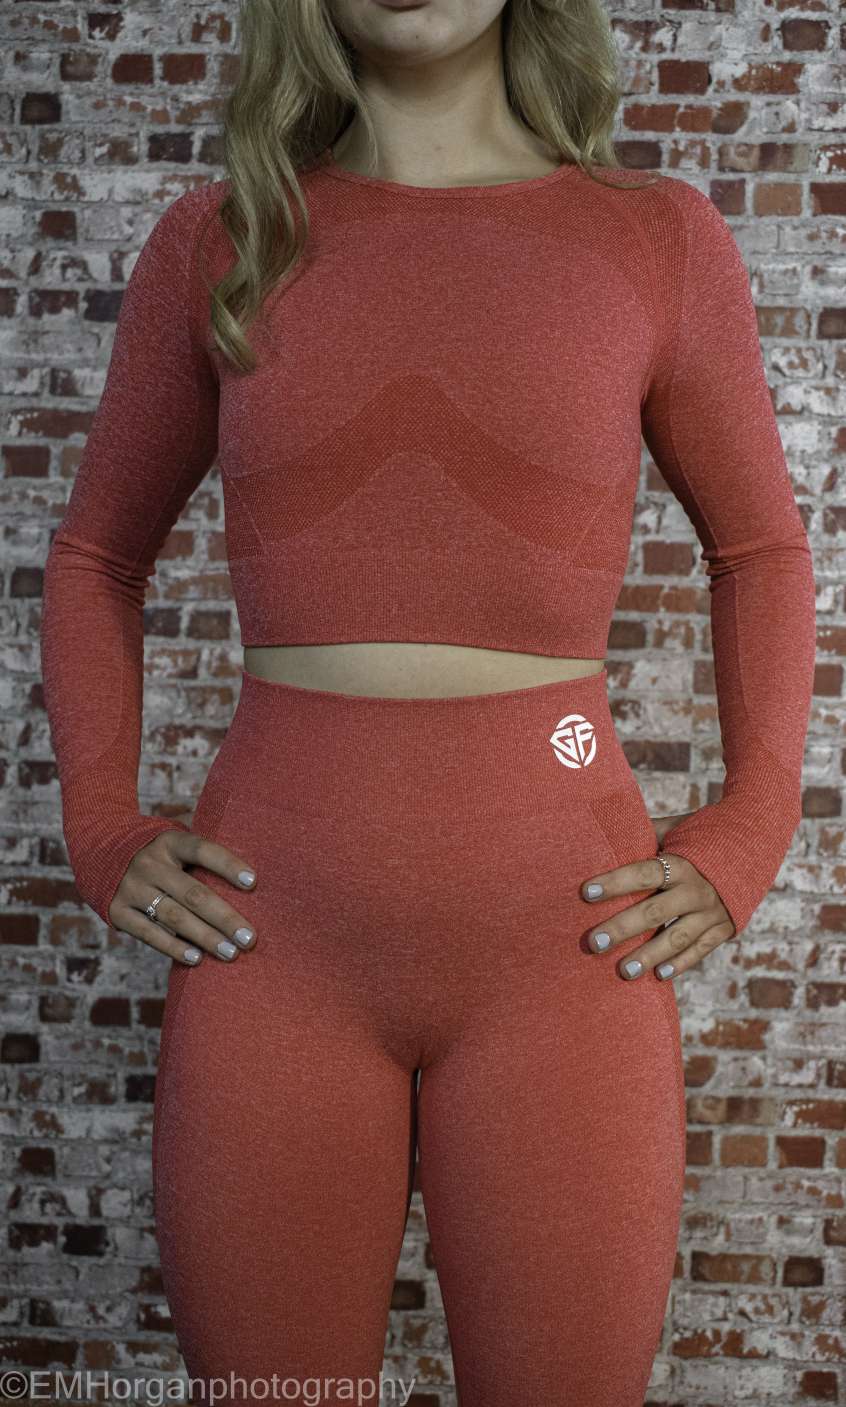 G-Fit Majestic long sleeve fitness top with leggings in Red